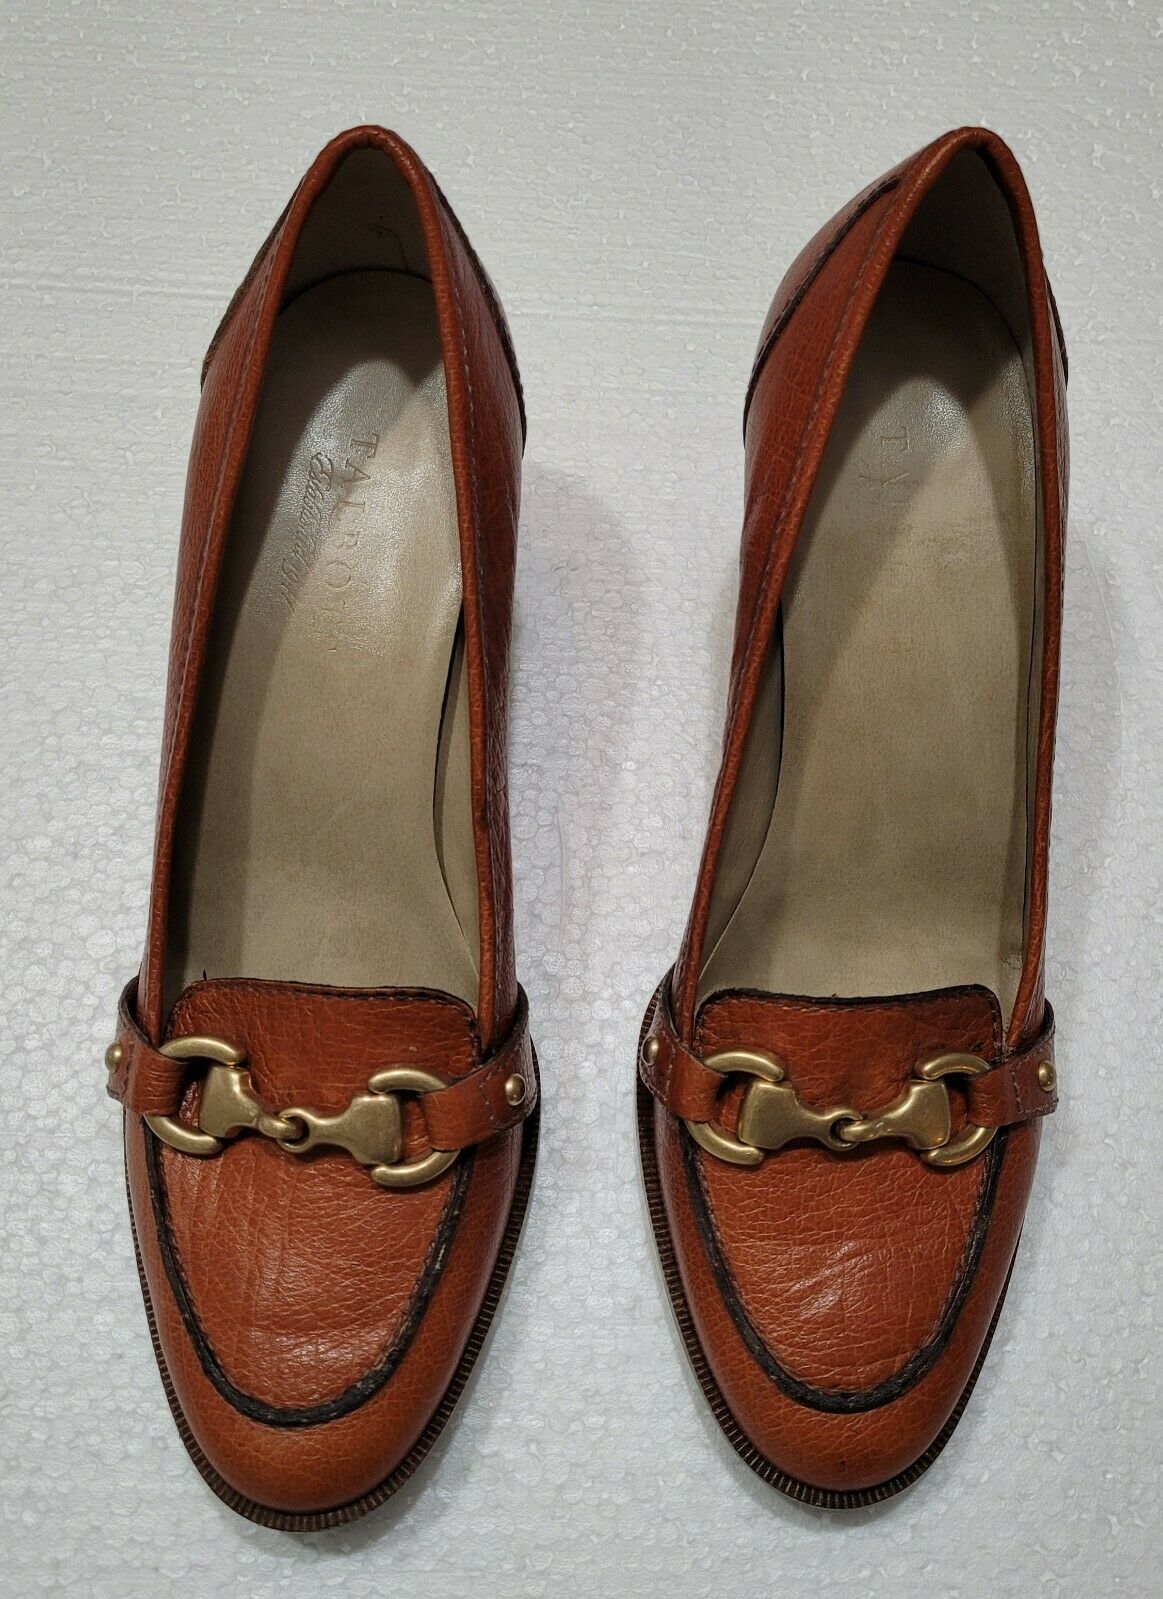 Talbots Brown Leather 2 Inch Pumps Heels Shoes Size 8 M